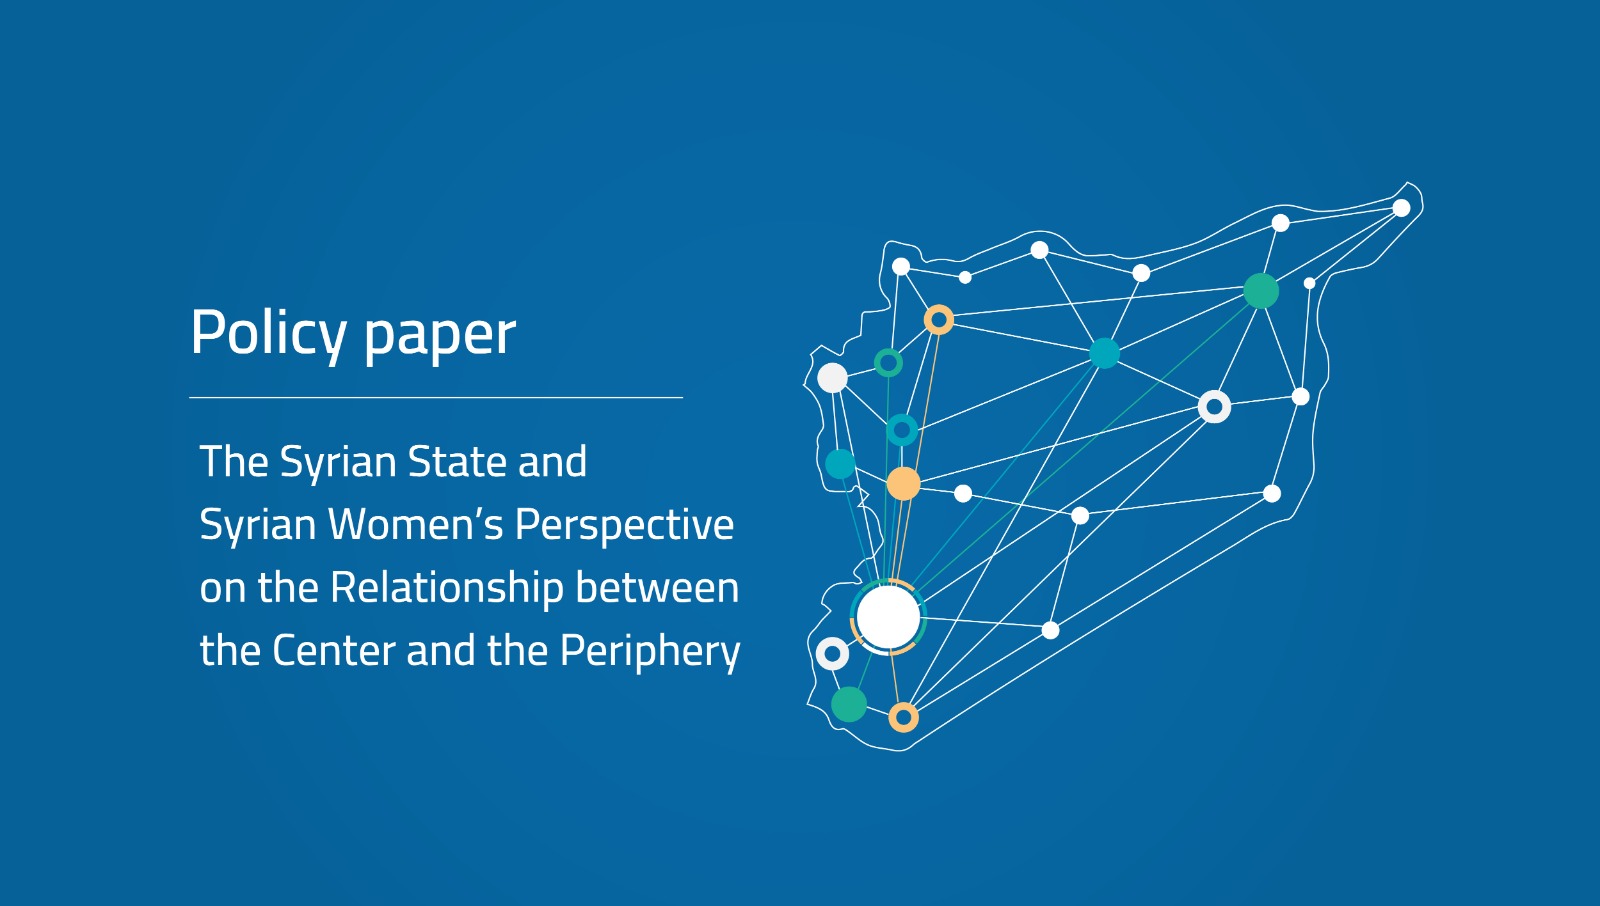 Policy Paper-The Syrian State and Syrian Women’s Perspective on the Relationship between the Center and the Periphery